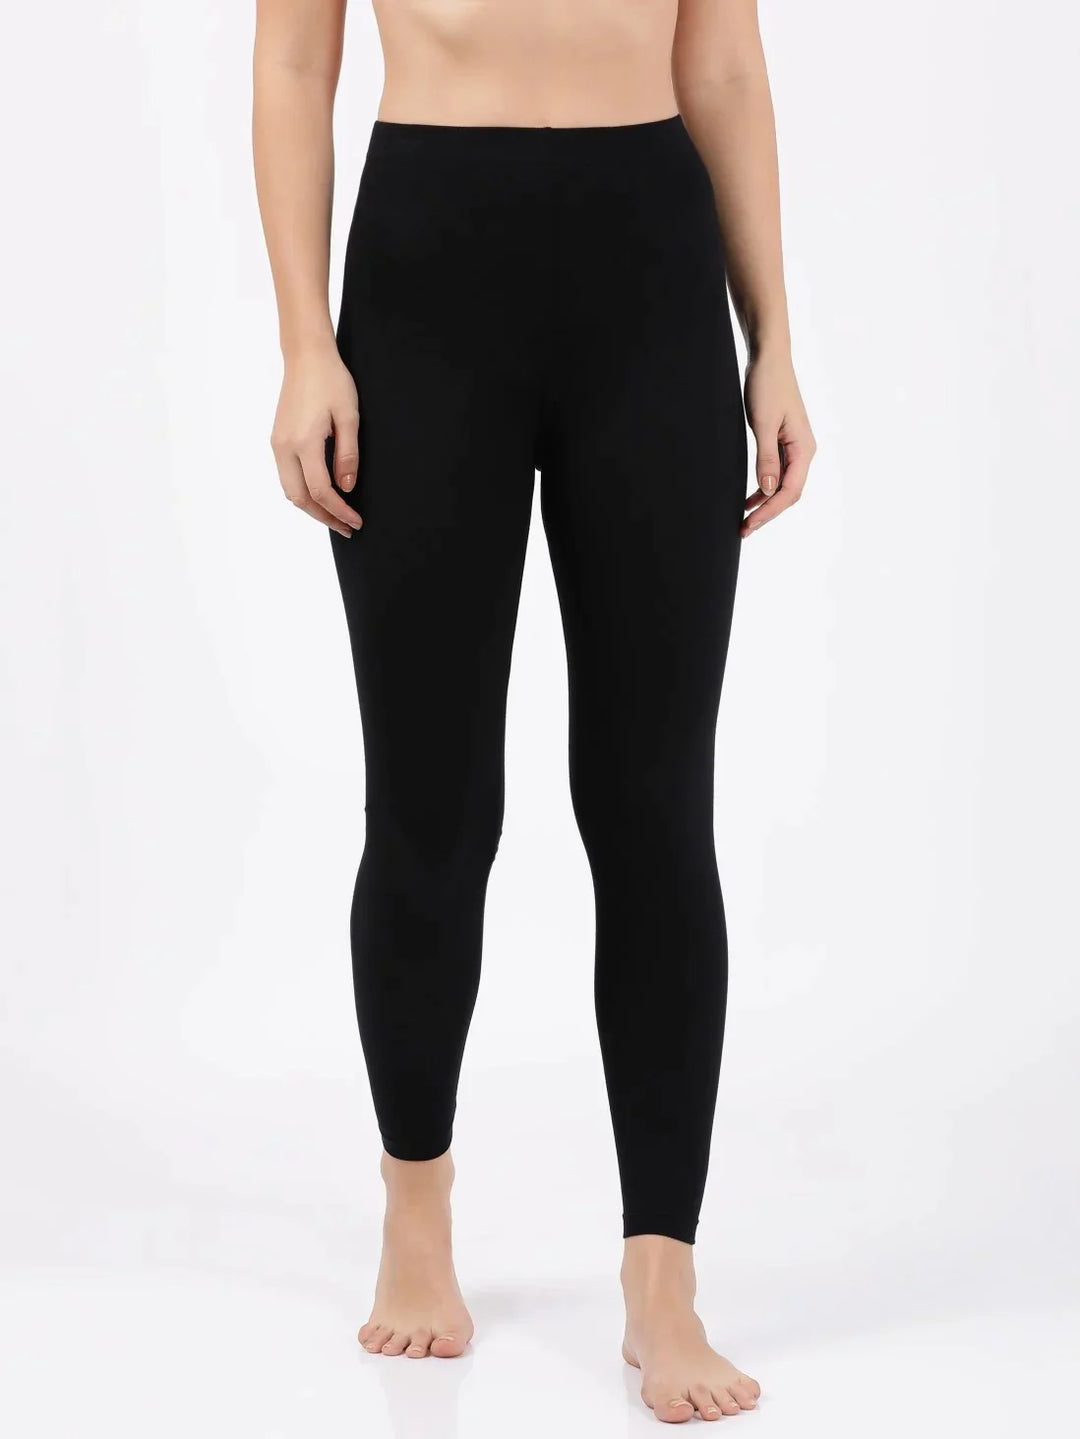 Women's Super Combed Cotton Elastane Stretch Yoga Pants with Side Zipper  Pockets - Black